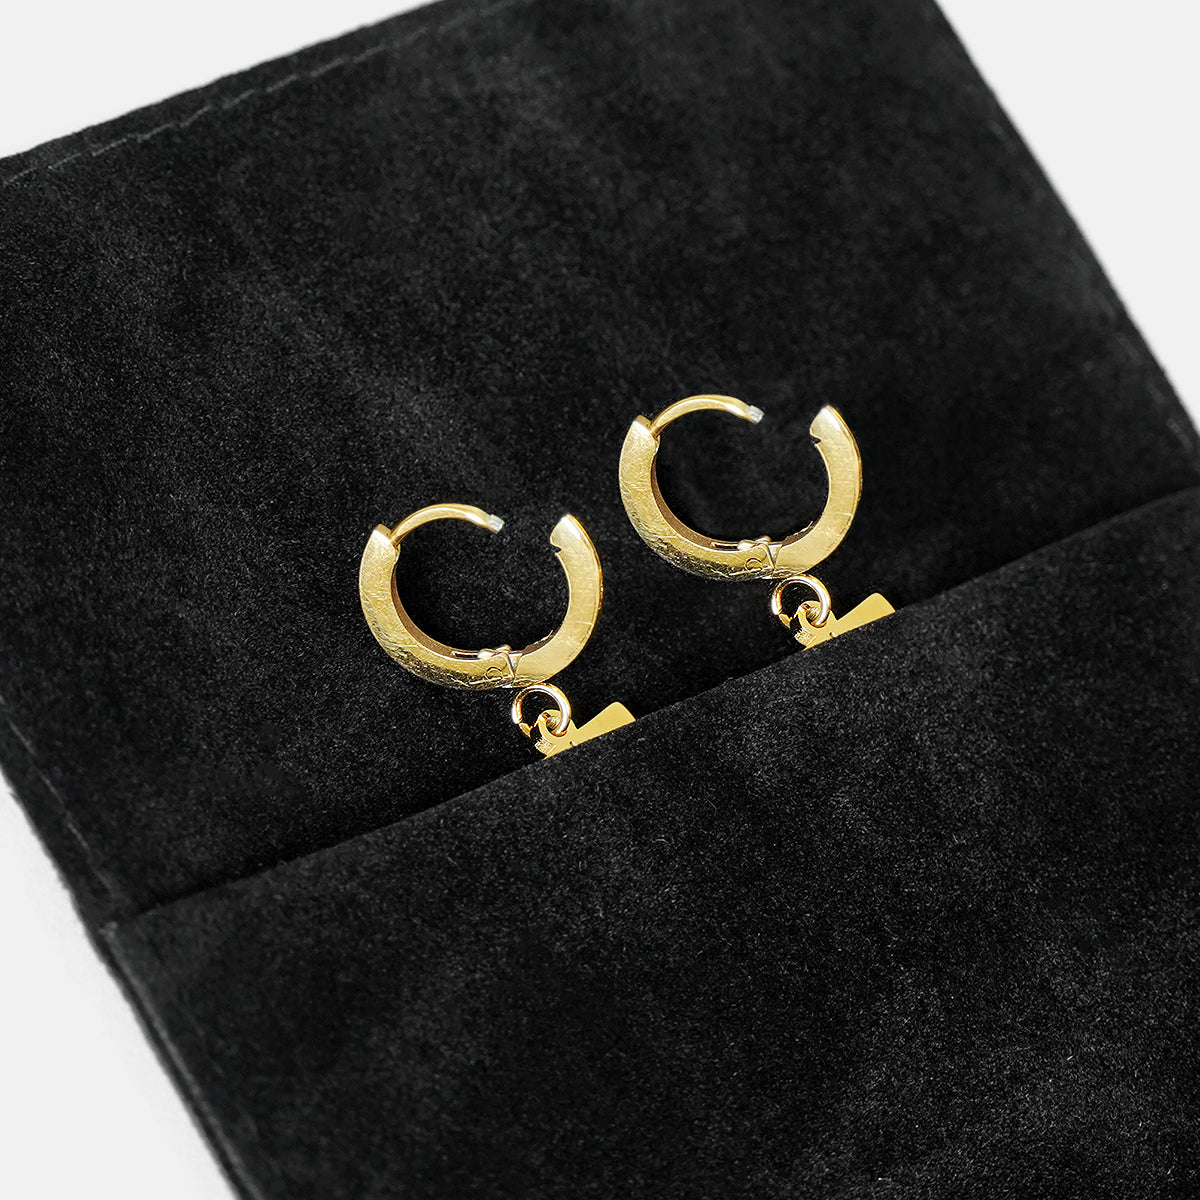 92 Number Earring - Gold Plated Stainless Steel